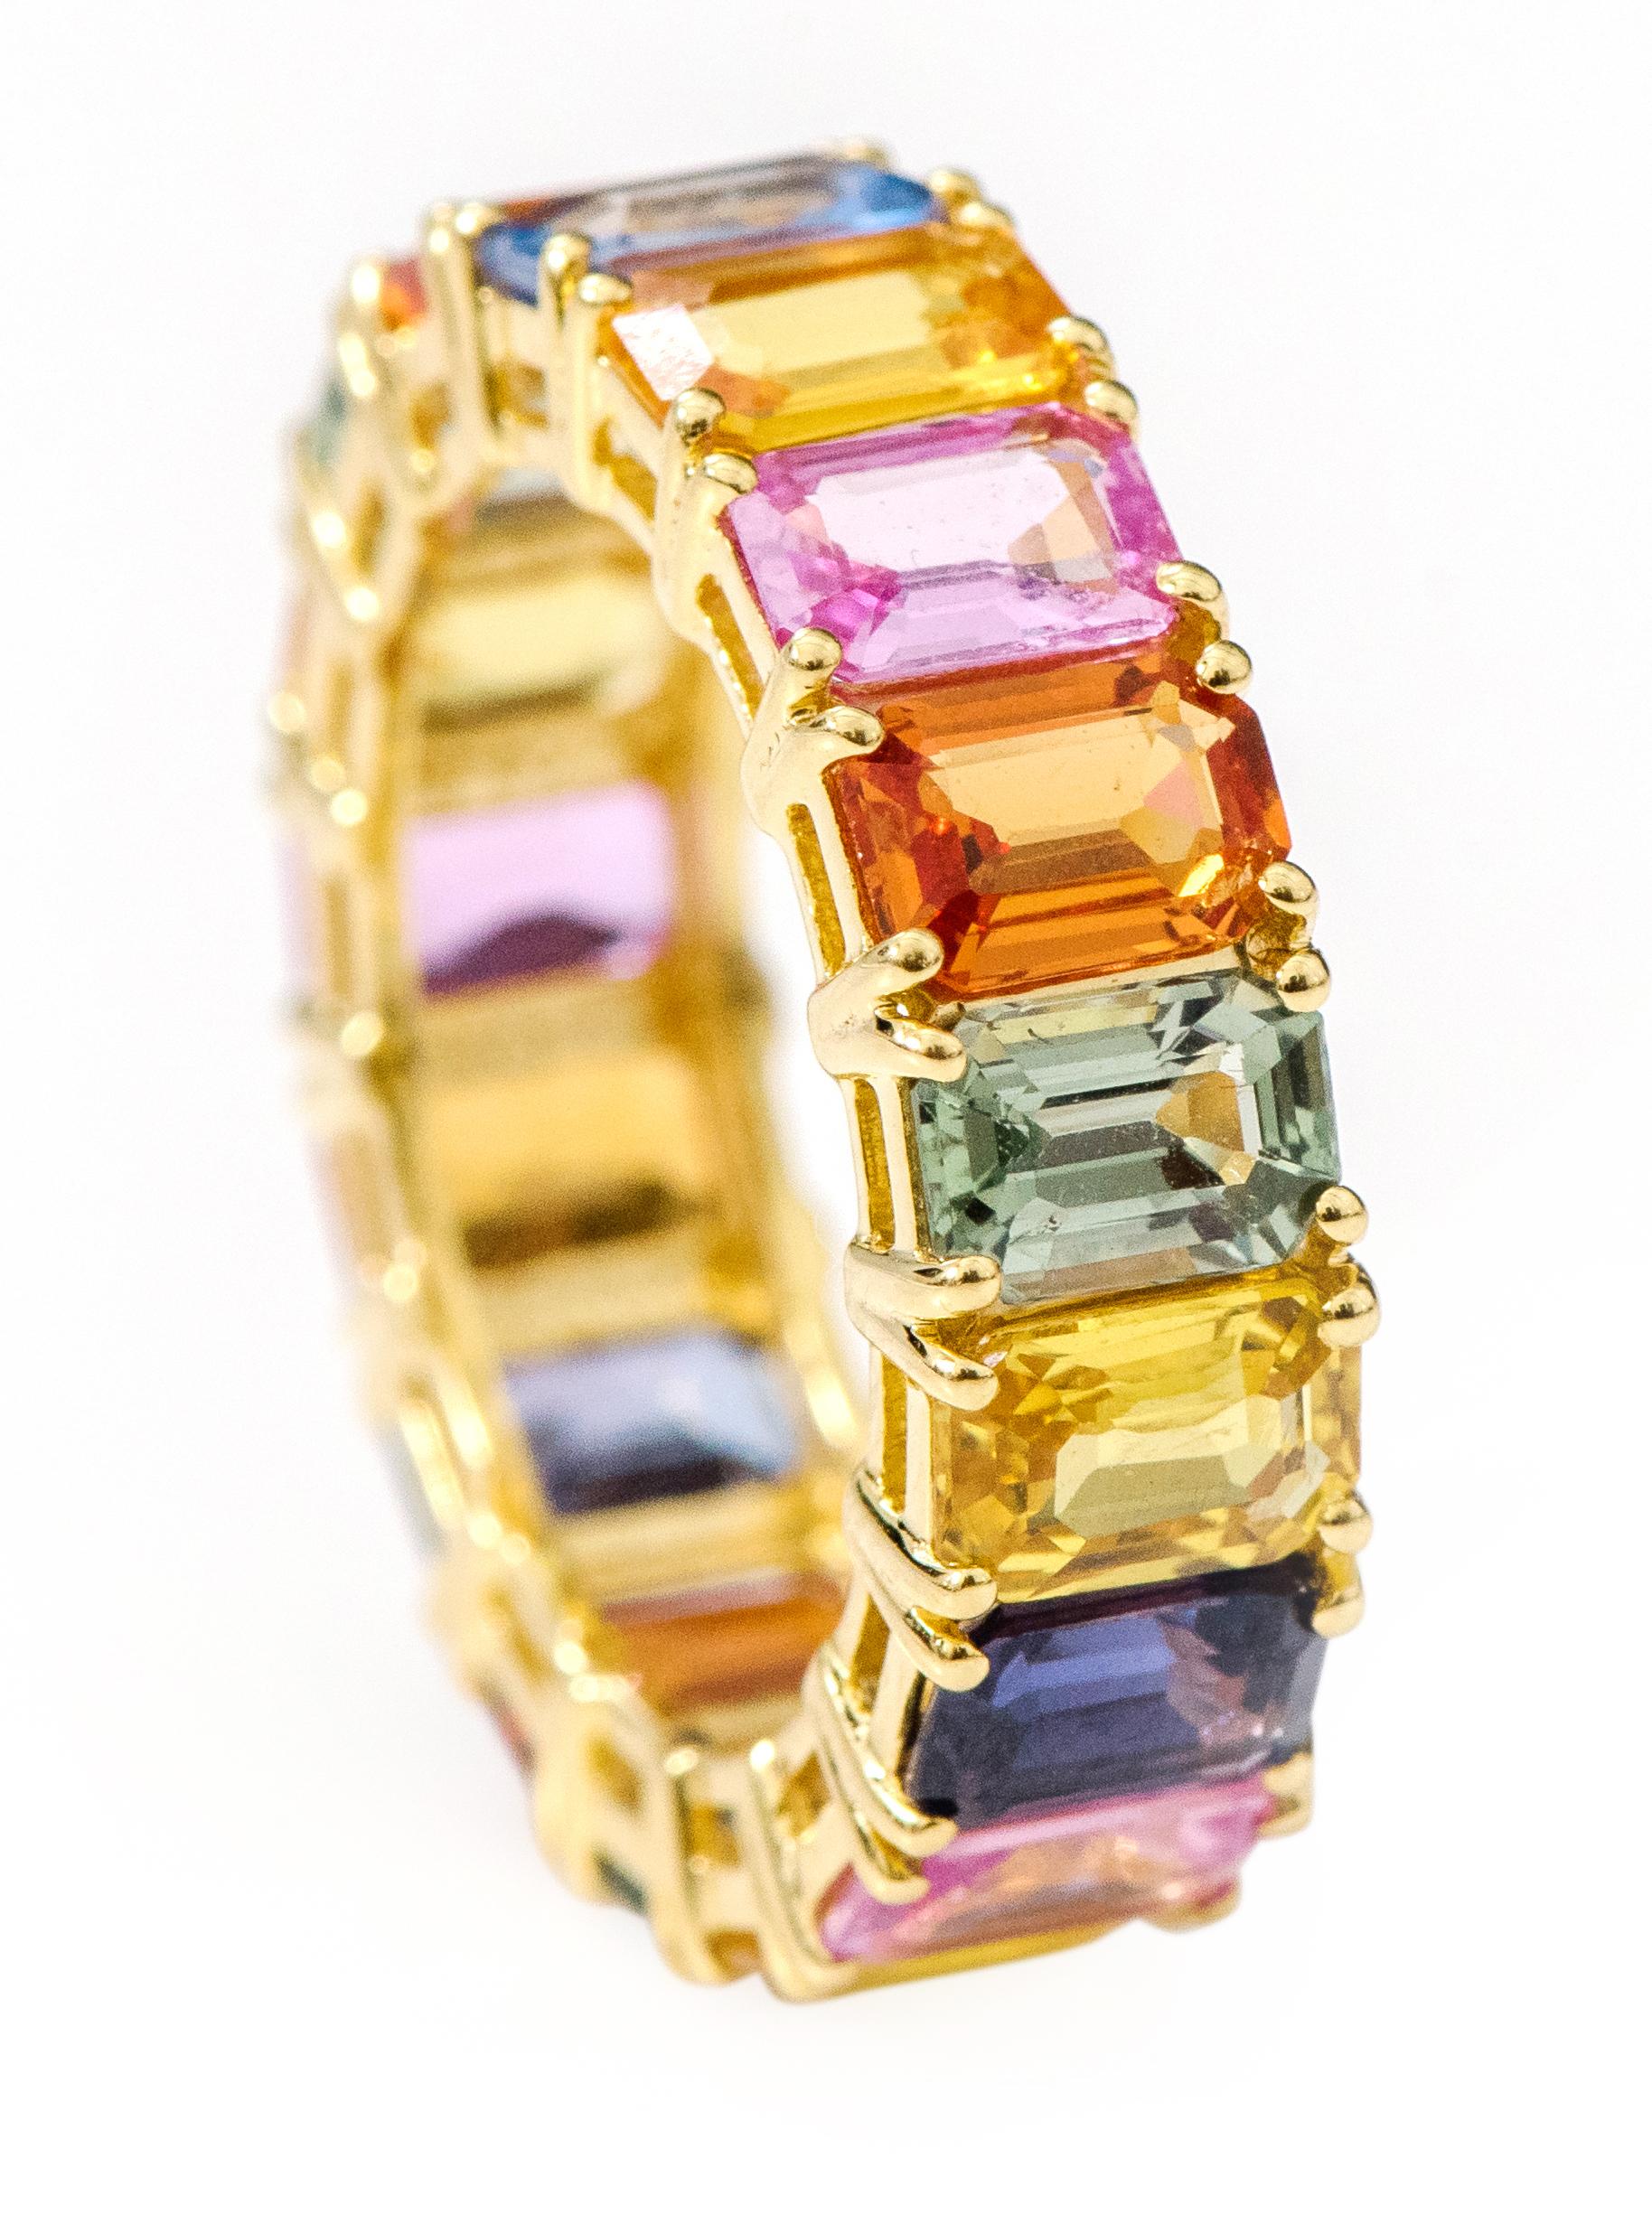 18 Karat Yellow Gold 11.05 Carat Emerald-Cut Multi-Sapphire Eternity Band Ring

This glorious rainbow multi-sapphire band is sensational. The solitaire horizontally placed emerald-cut multi-sapphires in grain prong yellow gold setting is timeless.